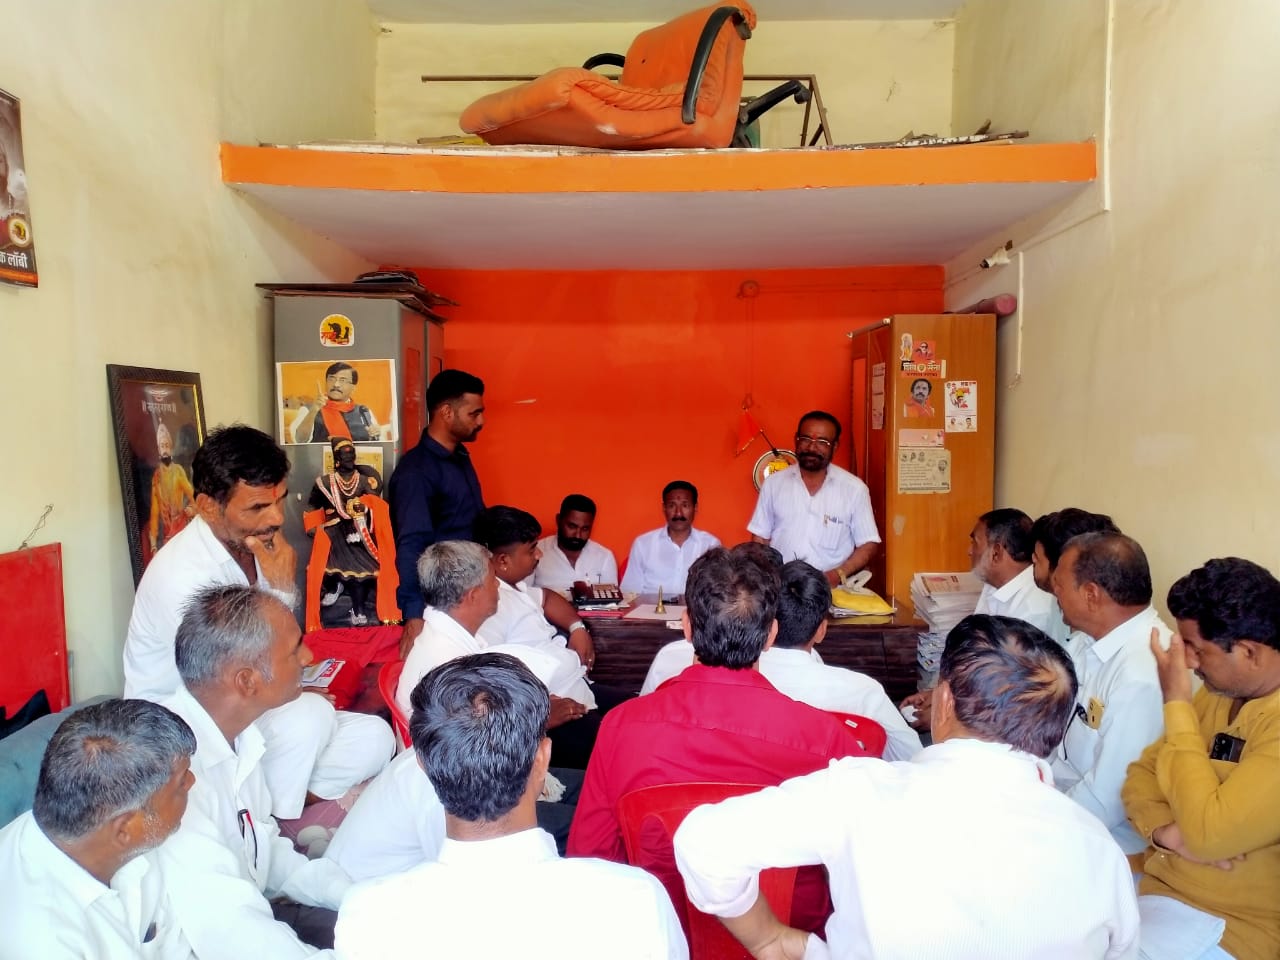 Urgent meeting of Shivsena Thackeray group in Karmala Determined to announce roles in front of senior leaders